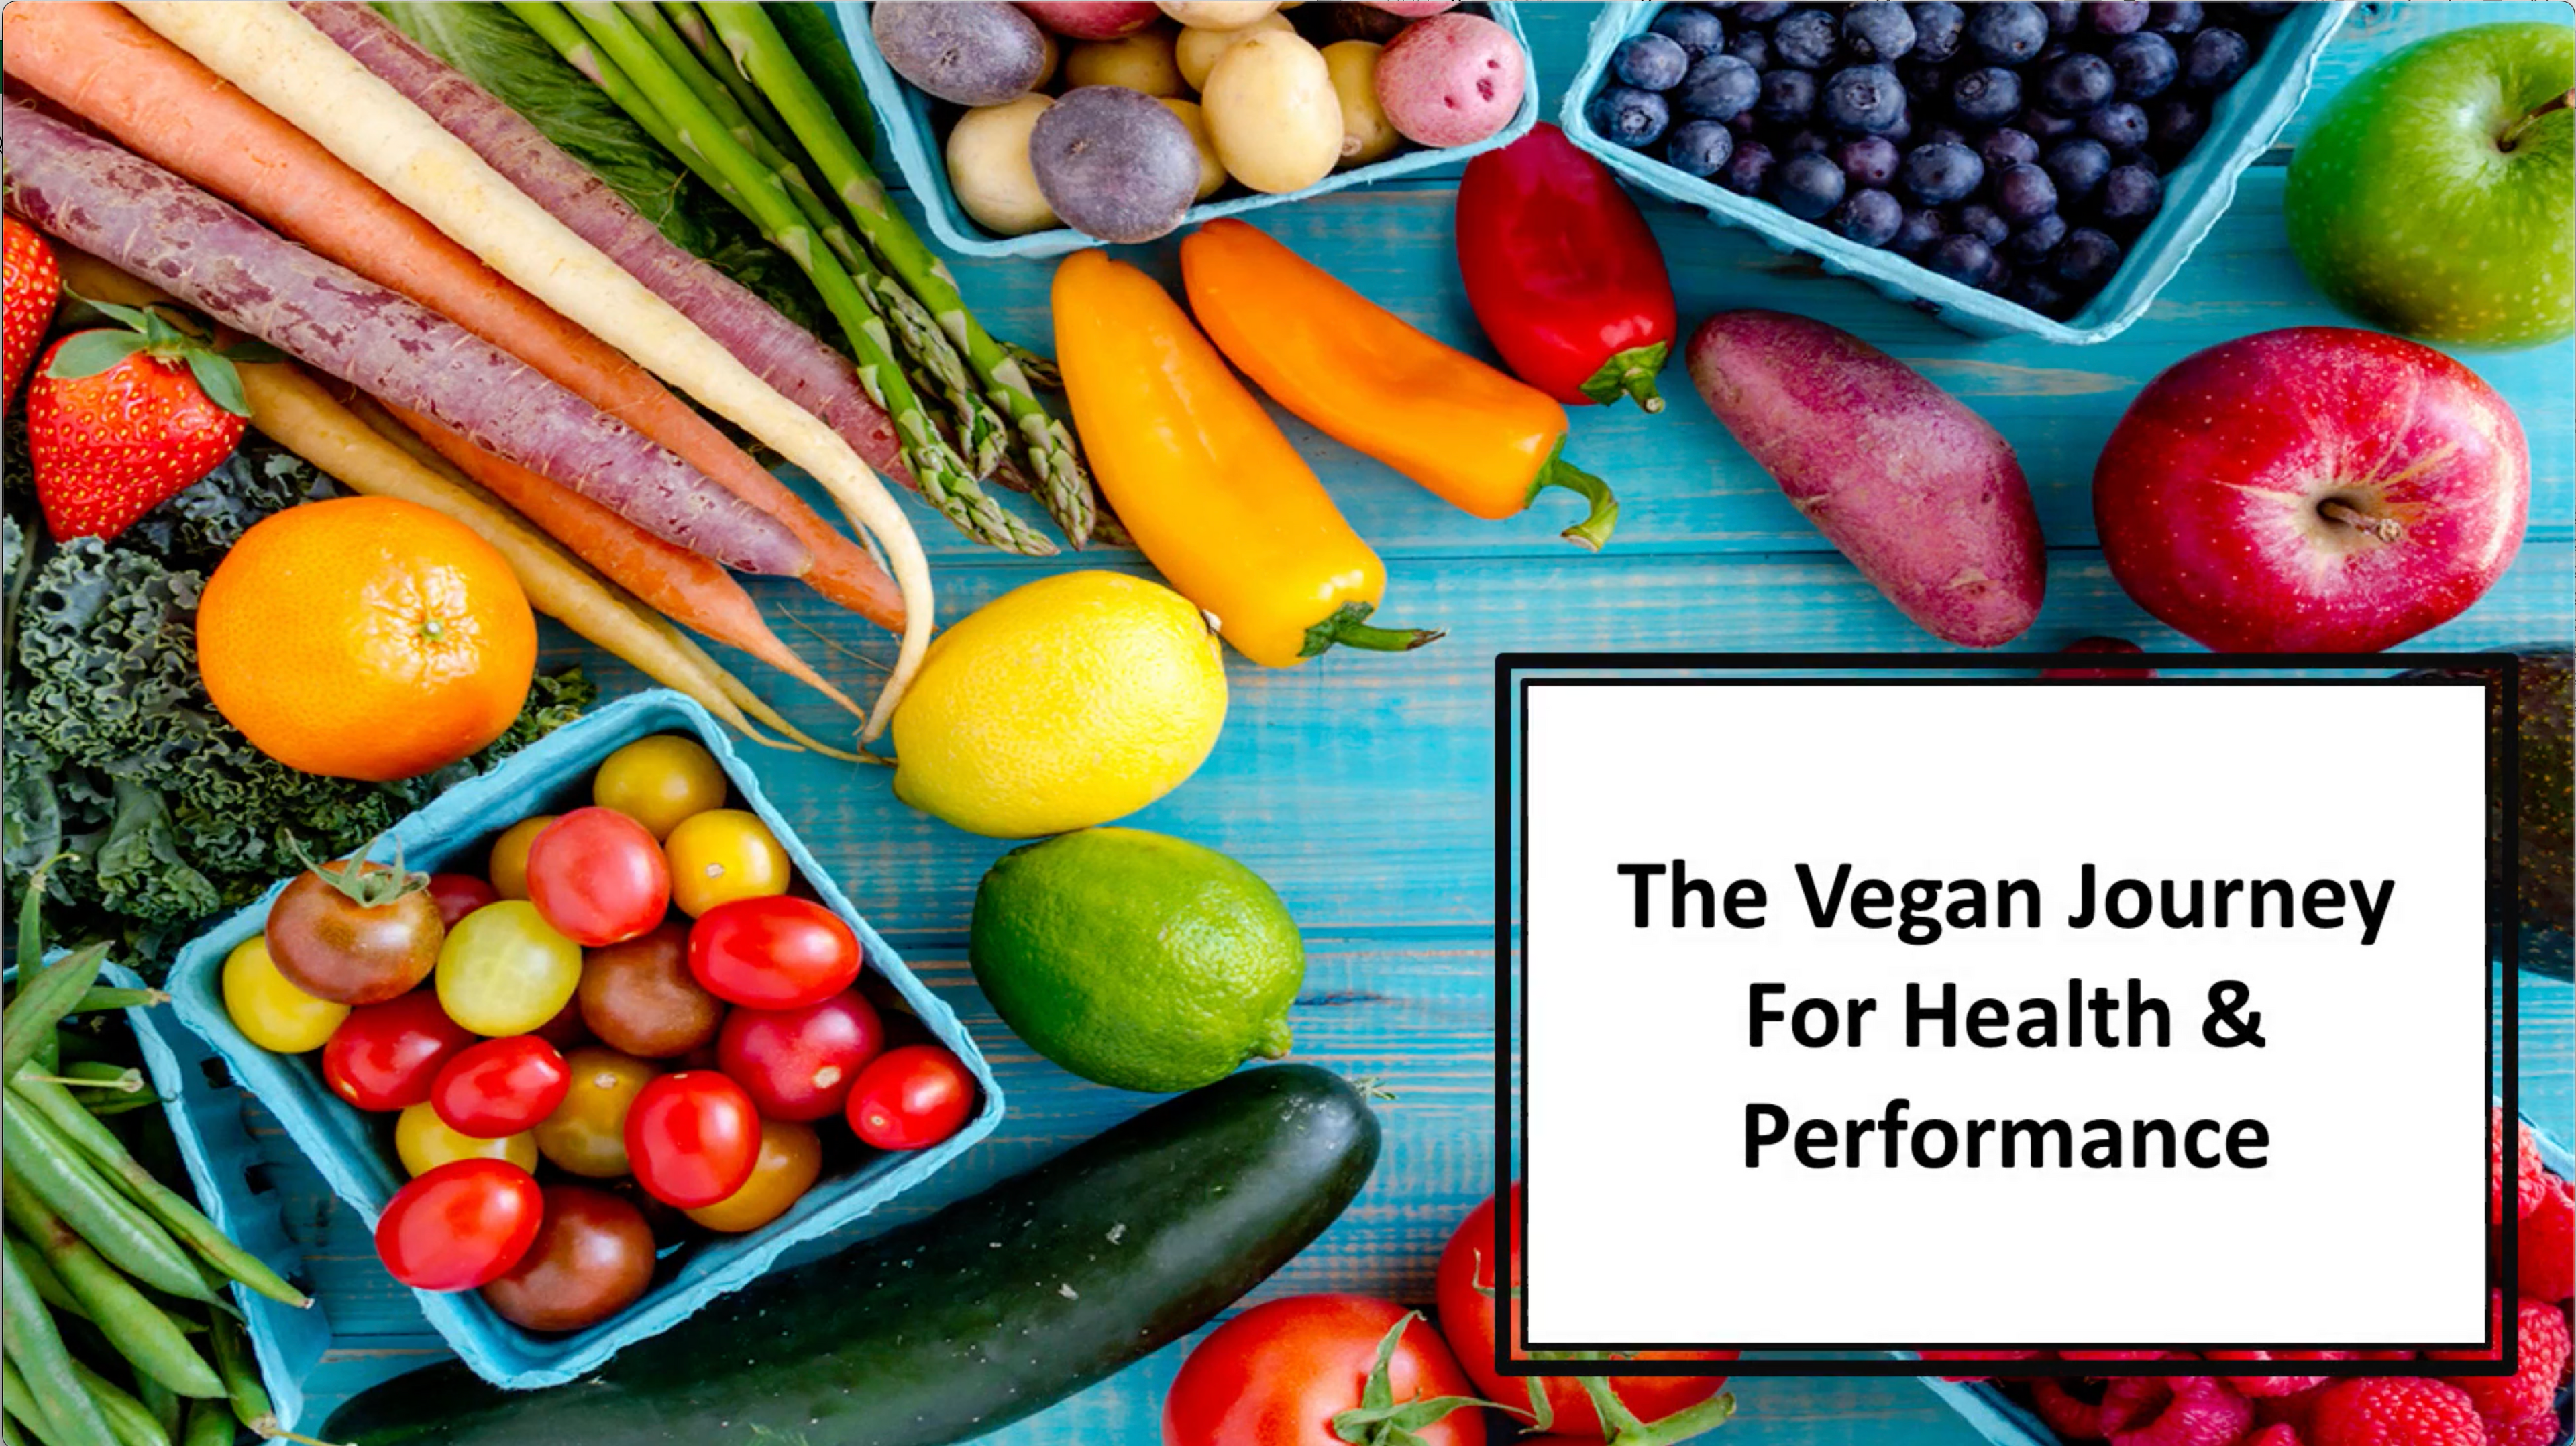 Load video: Vegan video chapter 1 goes into the vegan journey for health and performance